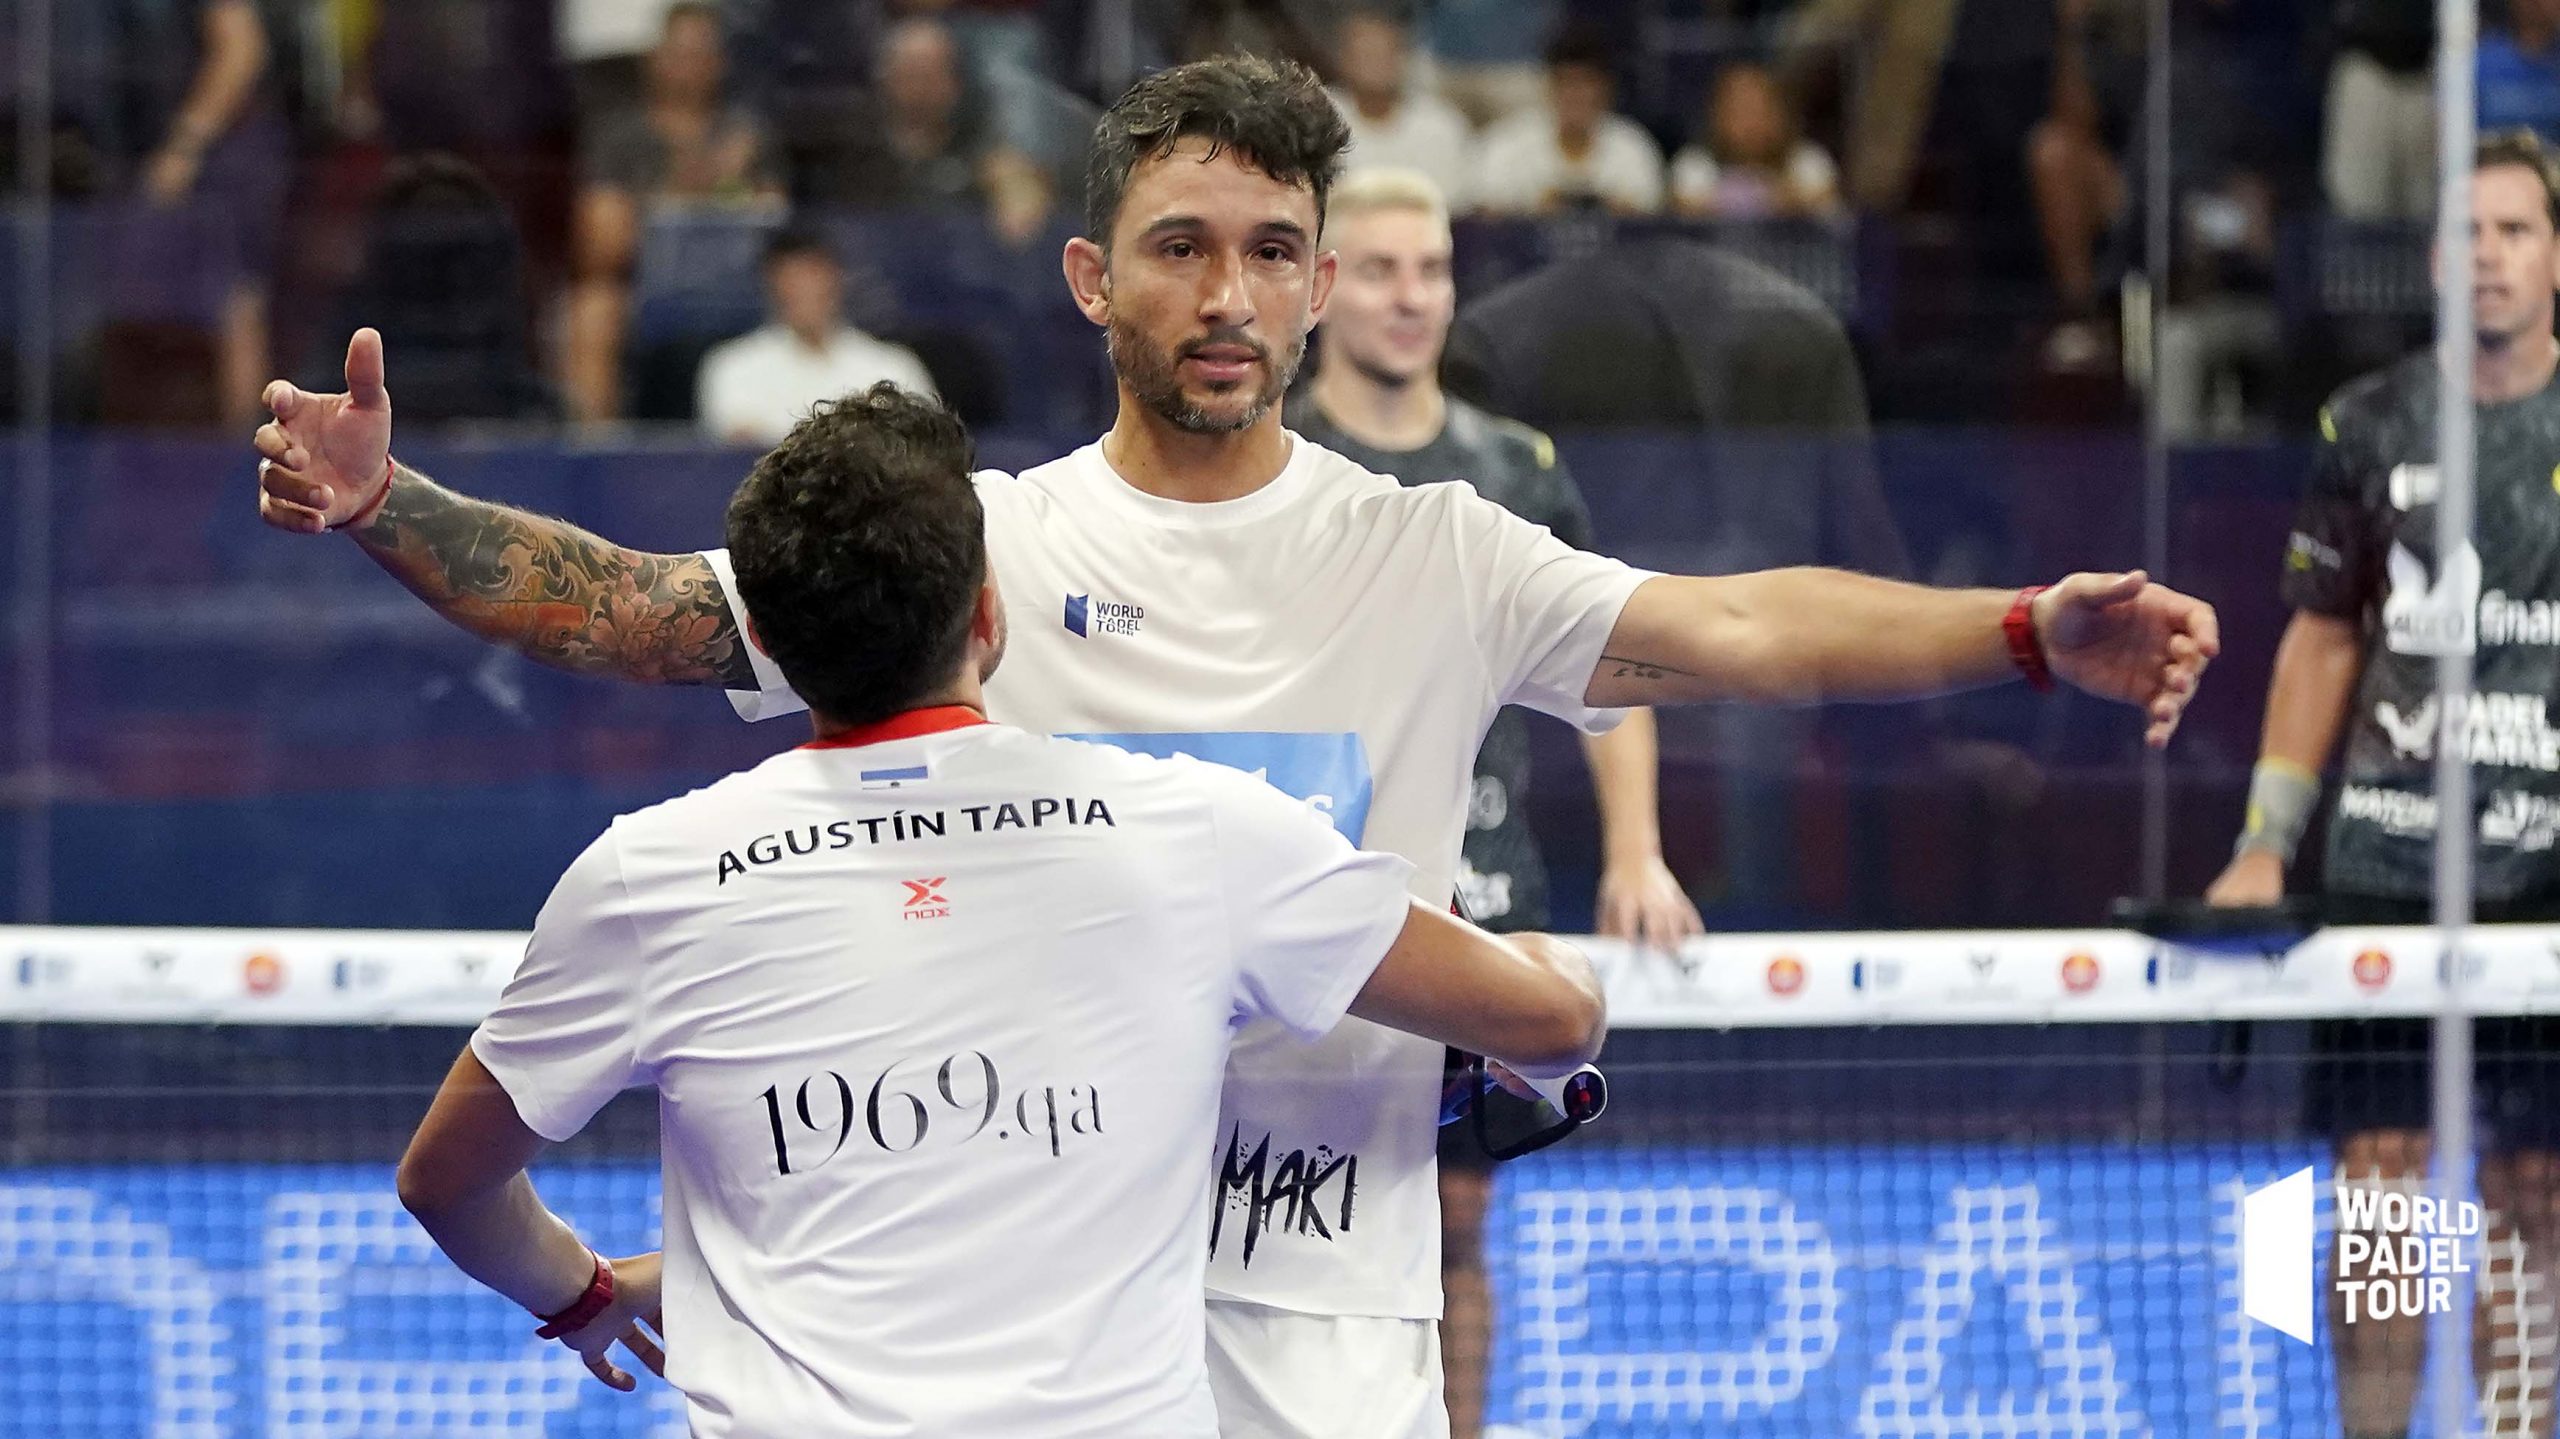 Tapia and Gutiérrez win direct duel for two-seed to make Valencia Open final